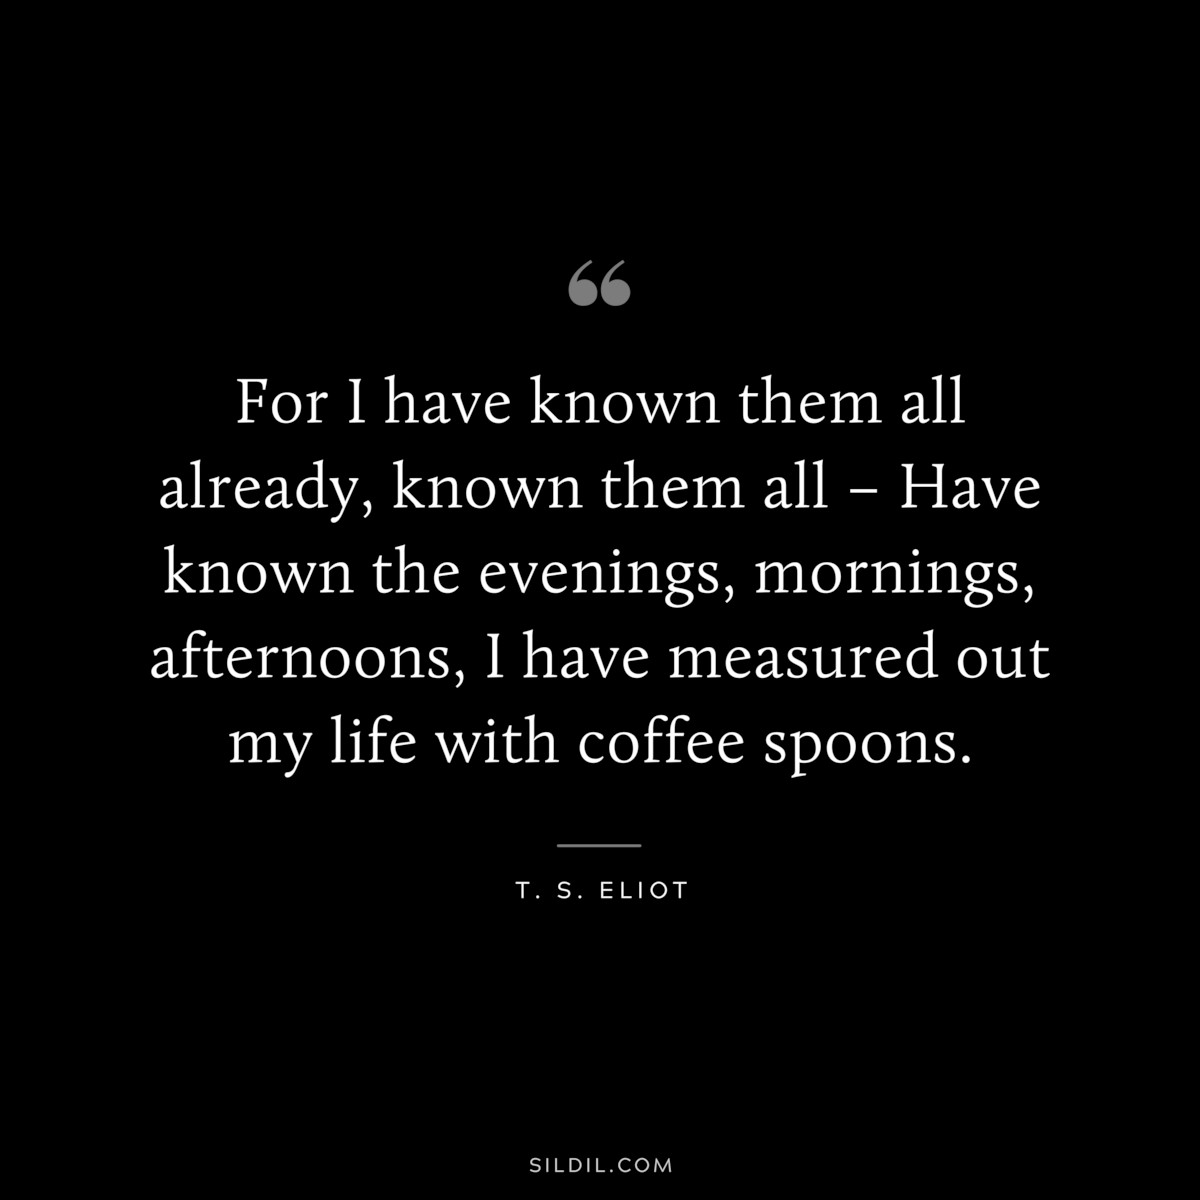 For I have known them all already, known them all – Have known the evenings, mornings, afternoons, I have measured out my life with coffee spoons. ― T. S. Eliot